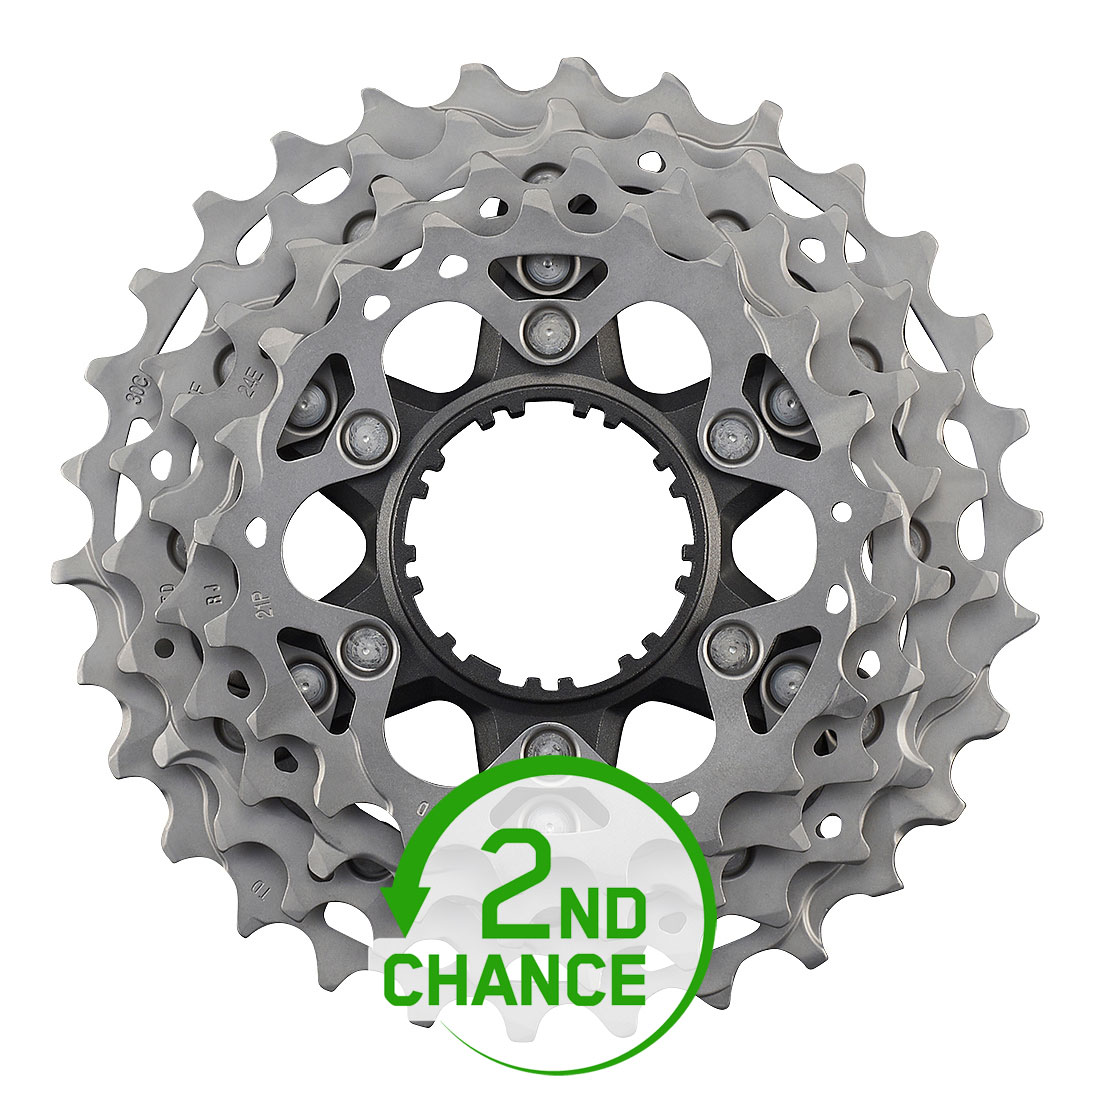 Picture of Shimano Sprocket Unit for Dura Ace CS-R9200 Cassette - 21-24-27-30 Teeth | Y0MV98030 - silver - 2nd Choice